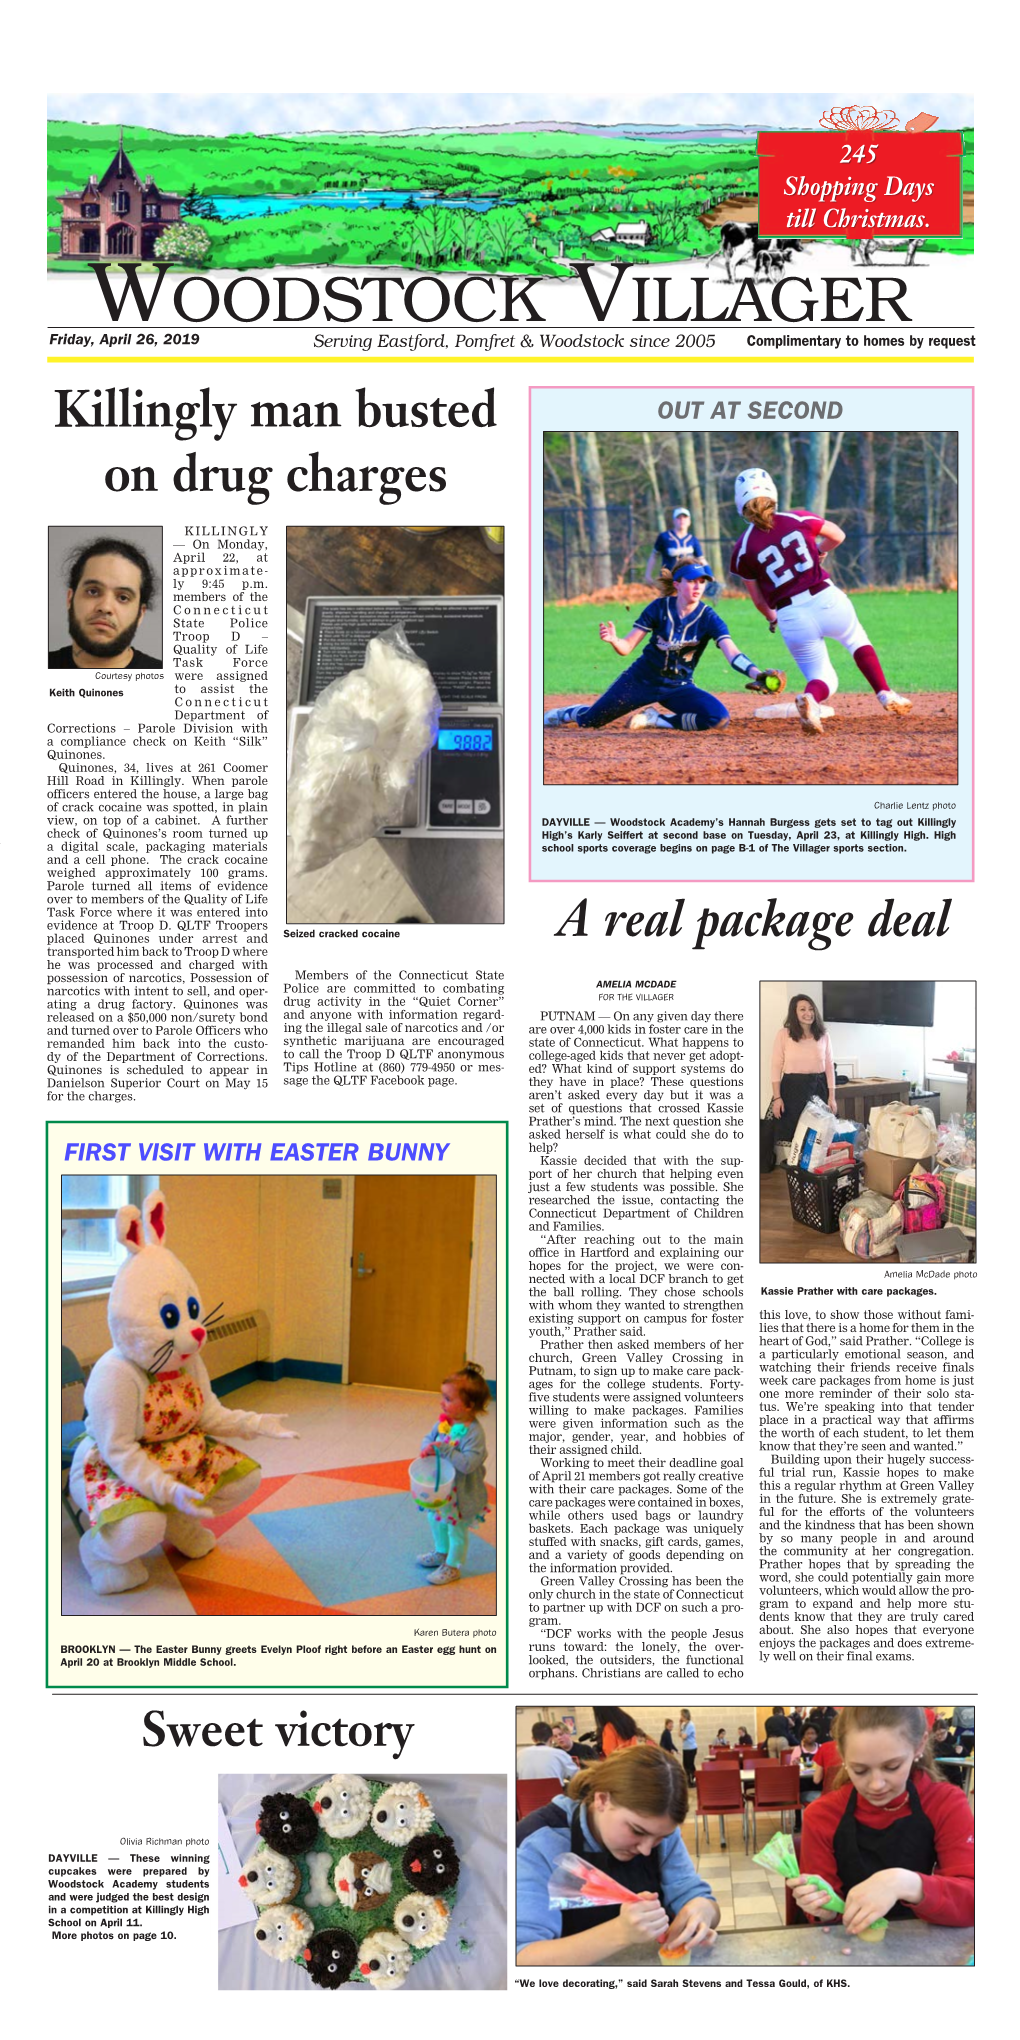 Woodstock Villager Friday, April 26, 2019 Serving Eastford, Pomfret & Woodstock Since 2005 Complimentary to Homes by Request